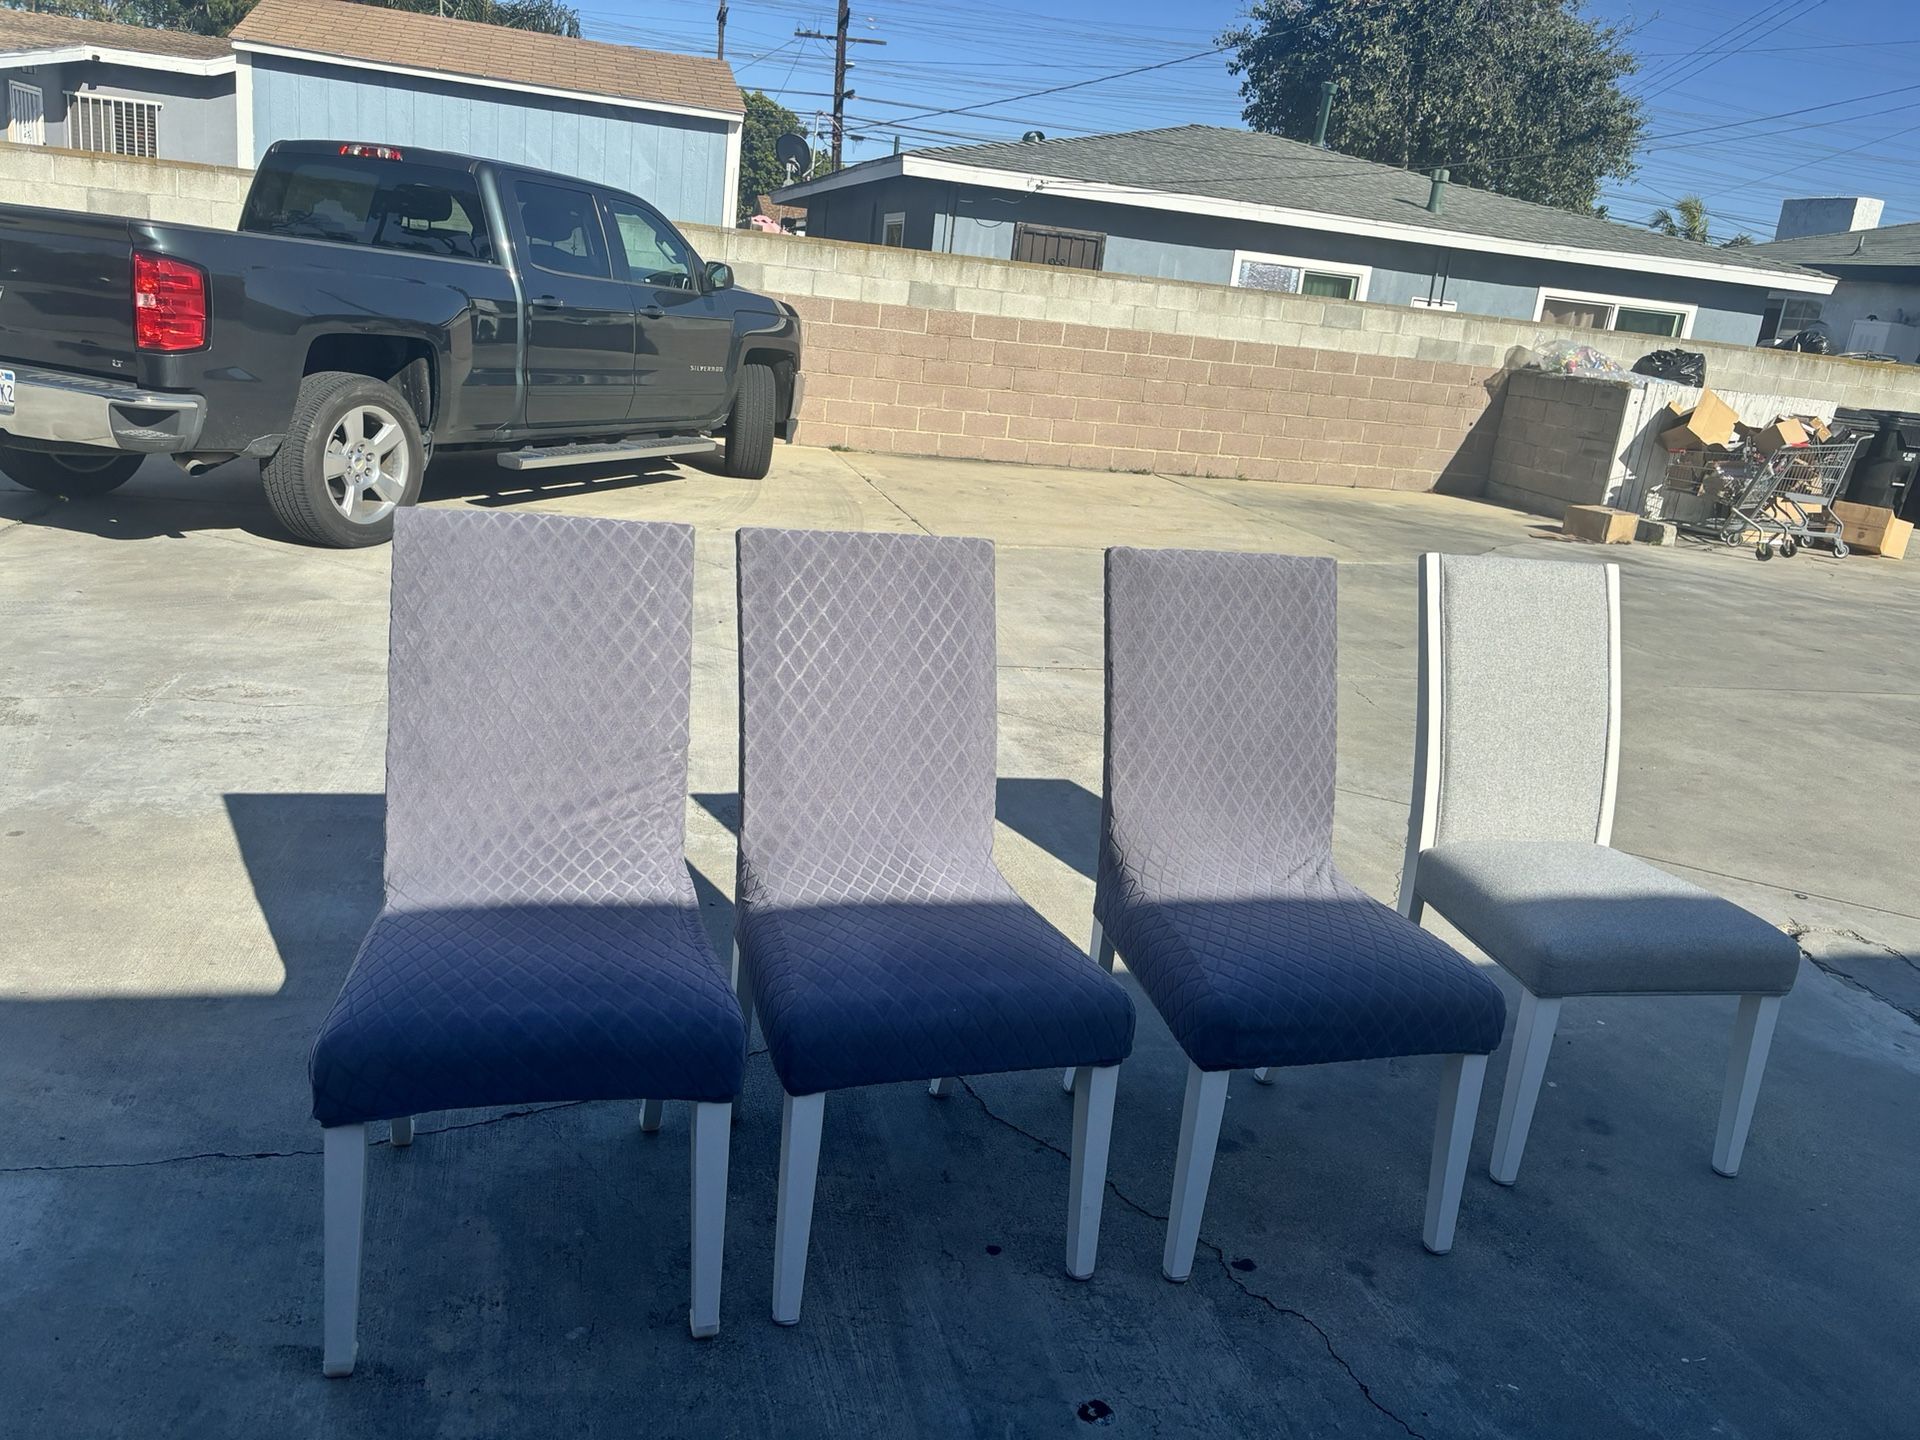 6 Brand New Dining Chairs With Waterproof Covers Included $125 Firm For All 6